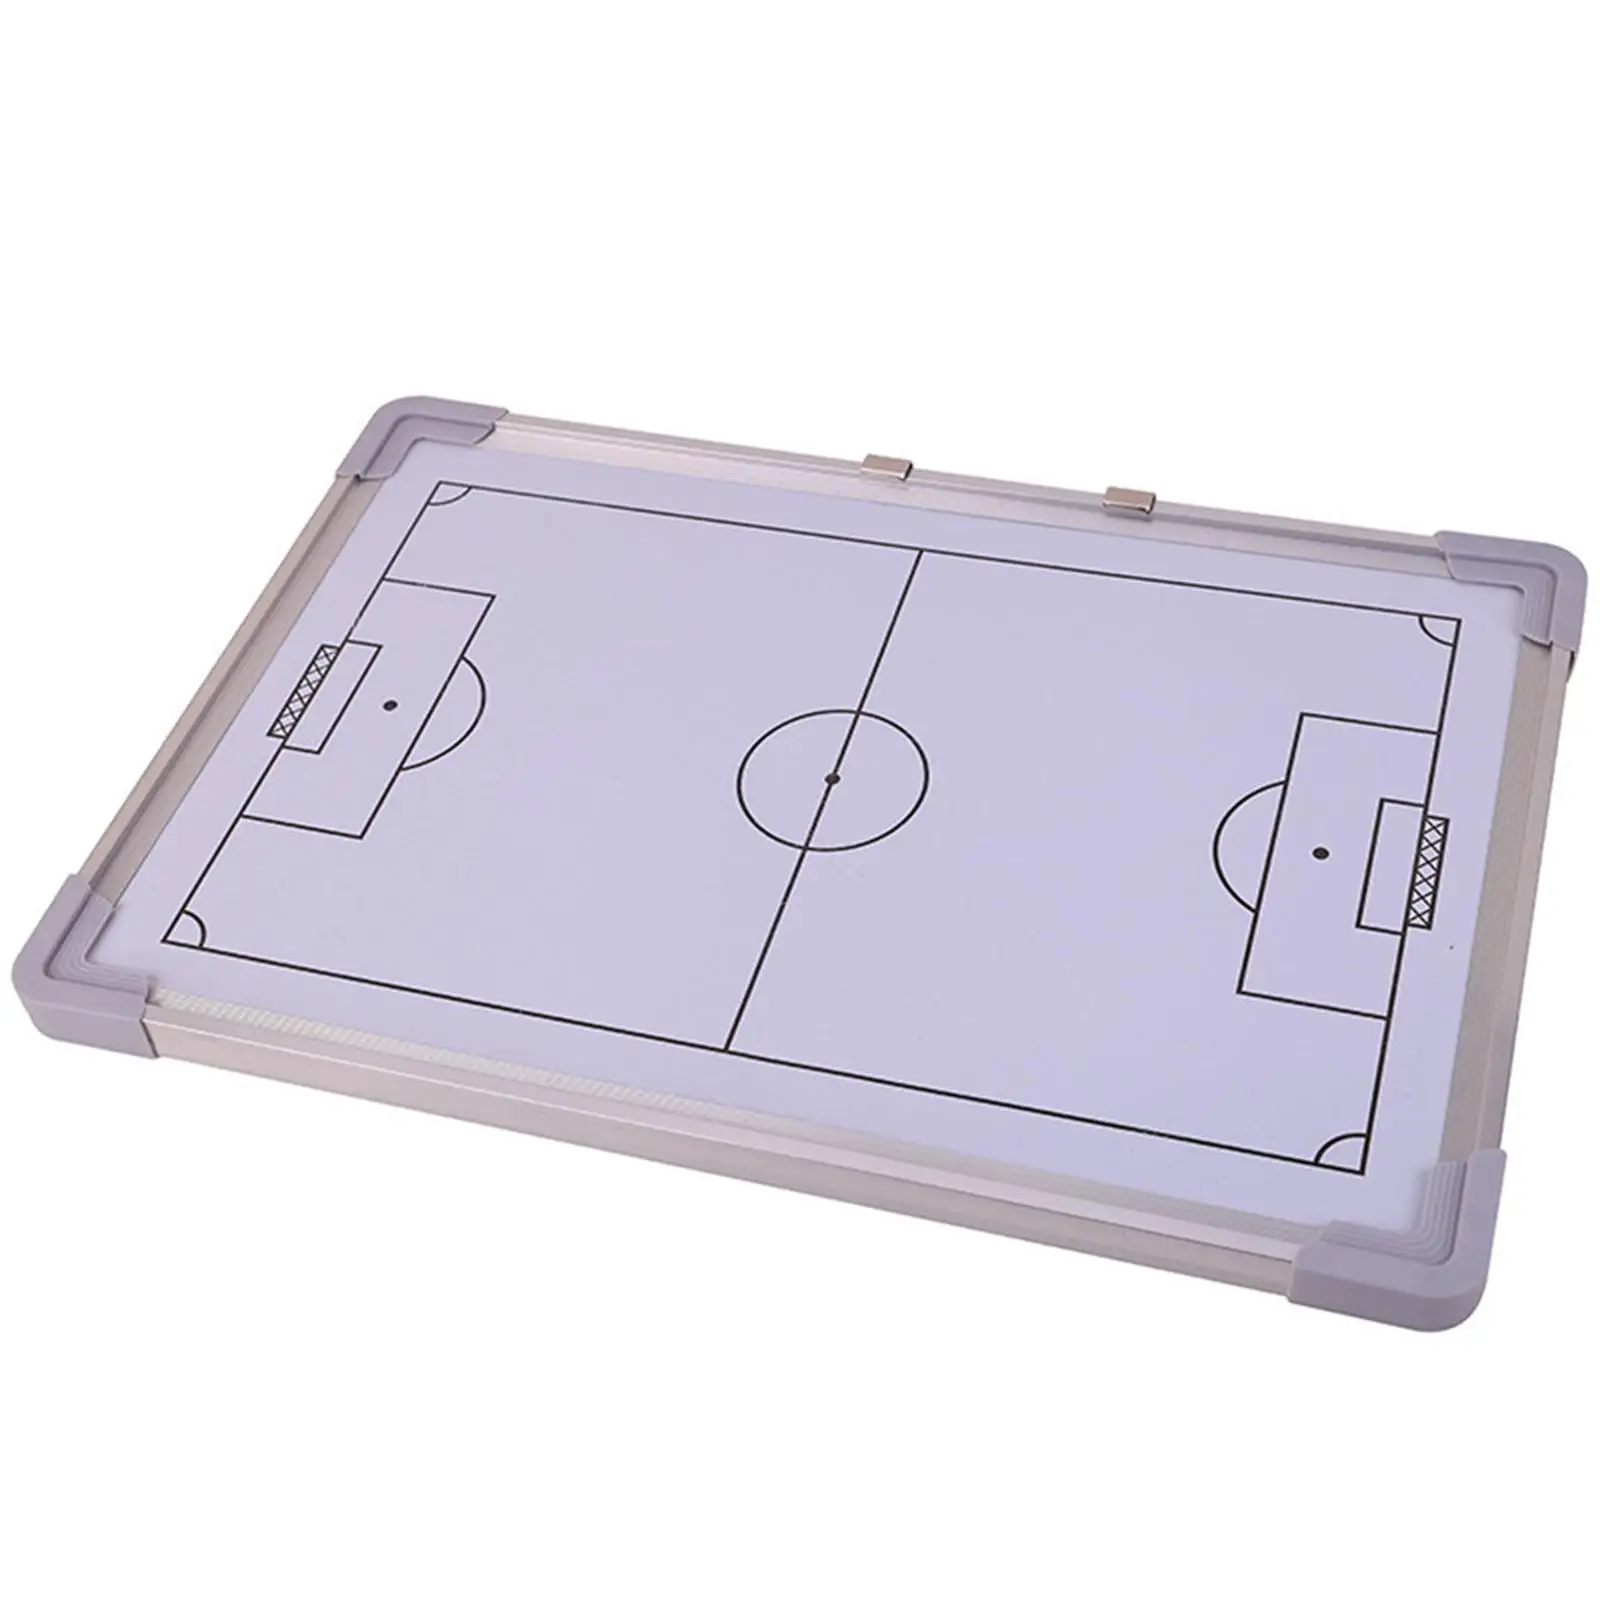 Professional Sport Football Coaches Board Magnetic Soccer Goals Training